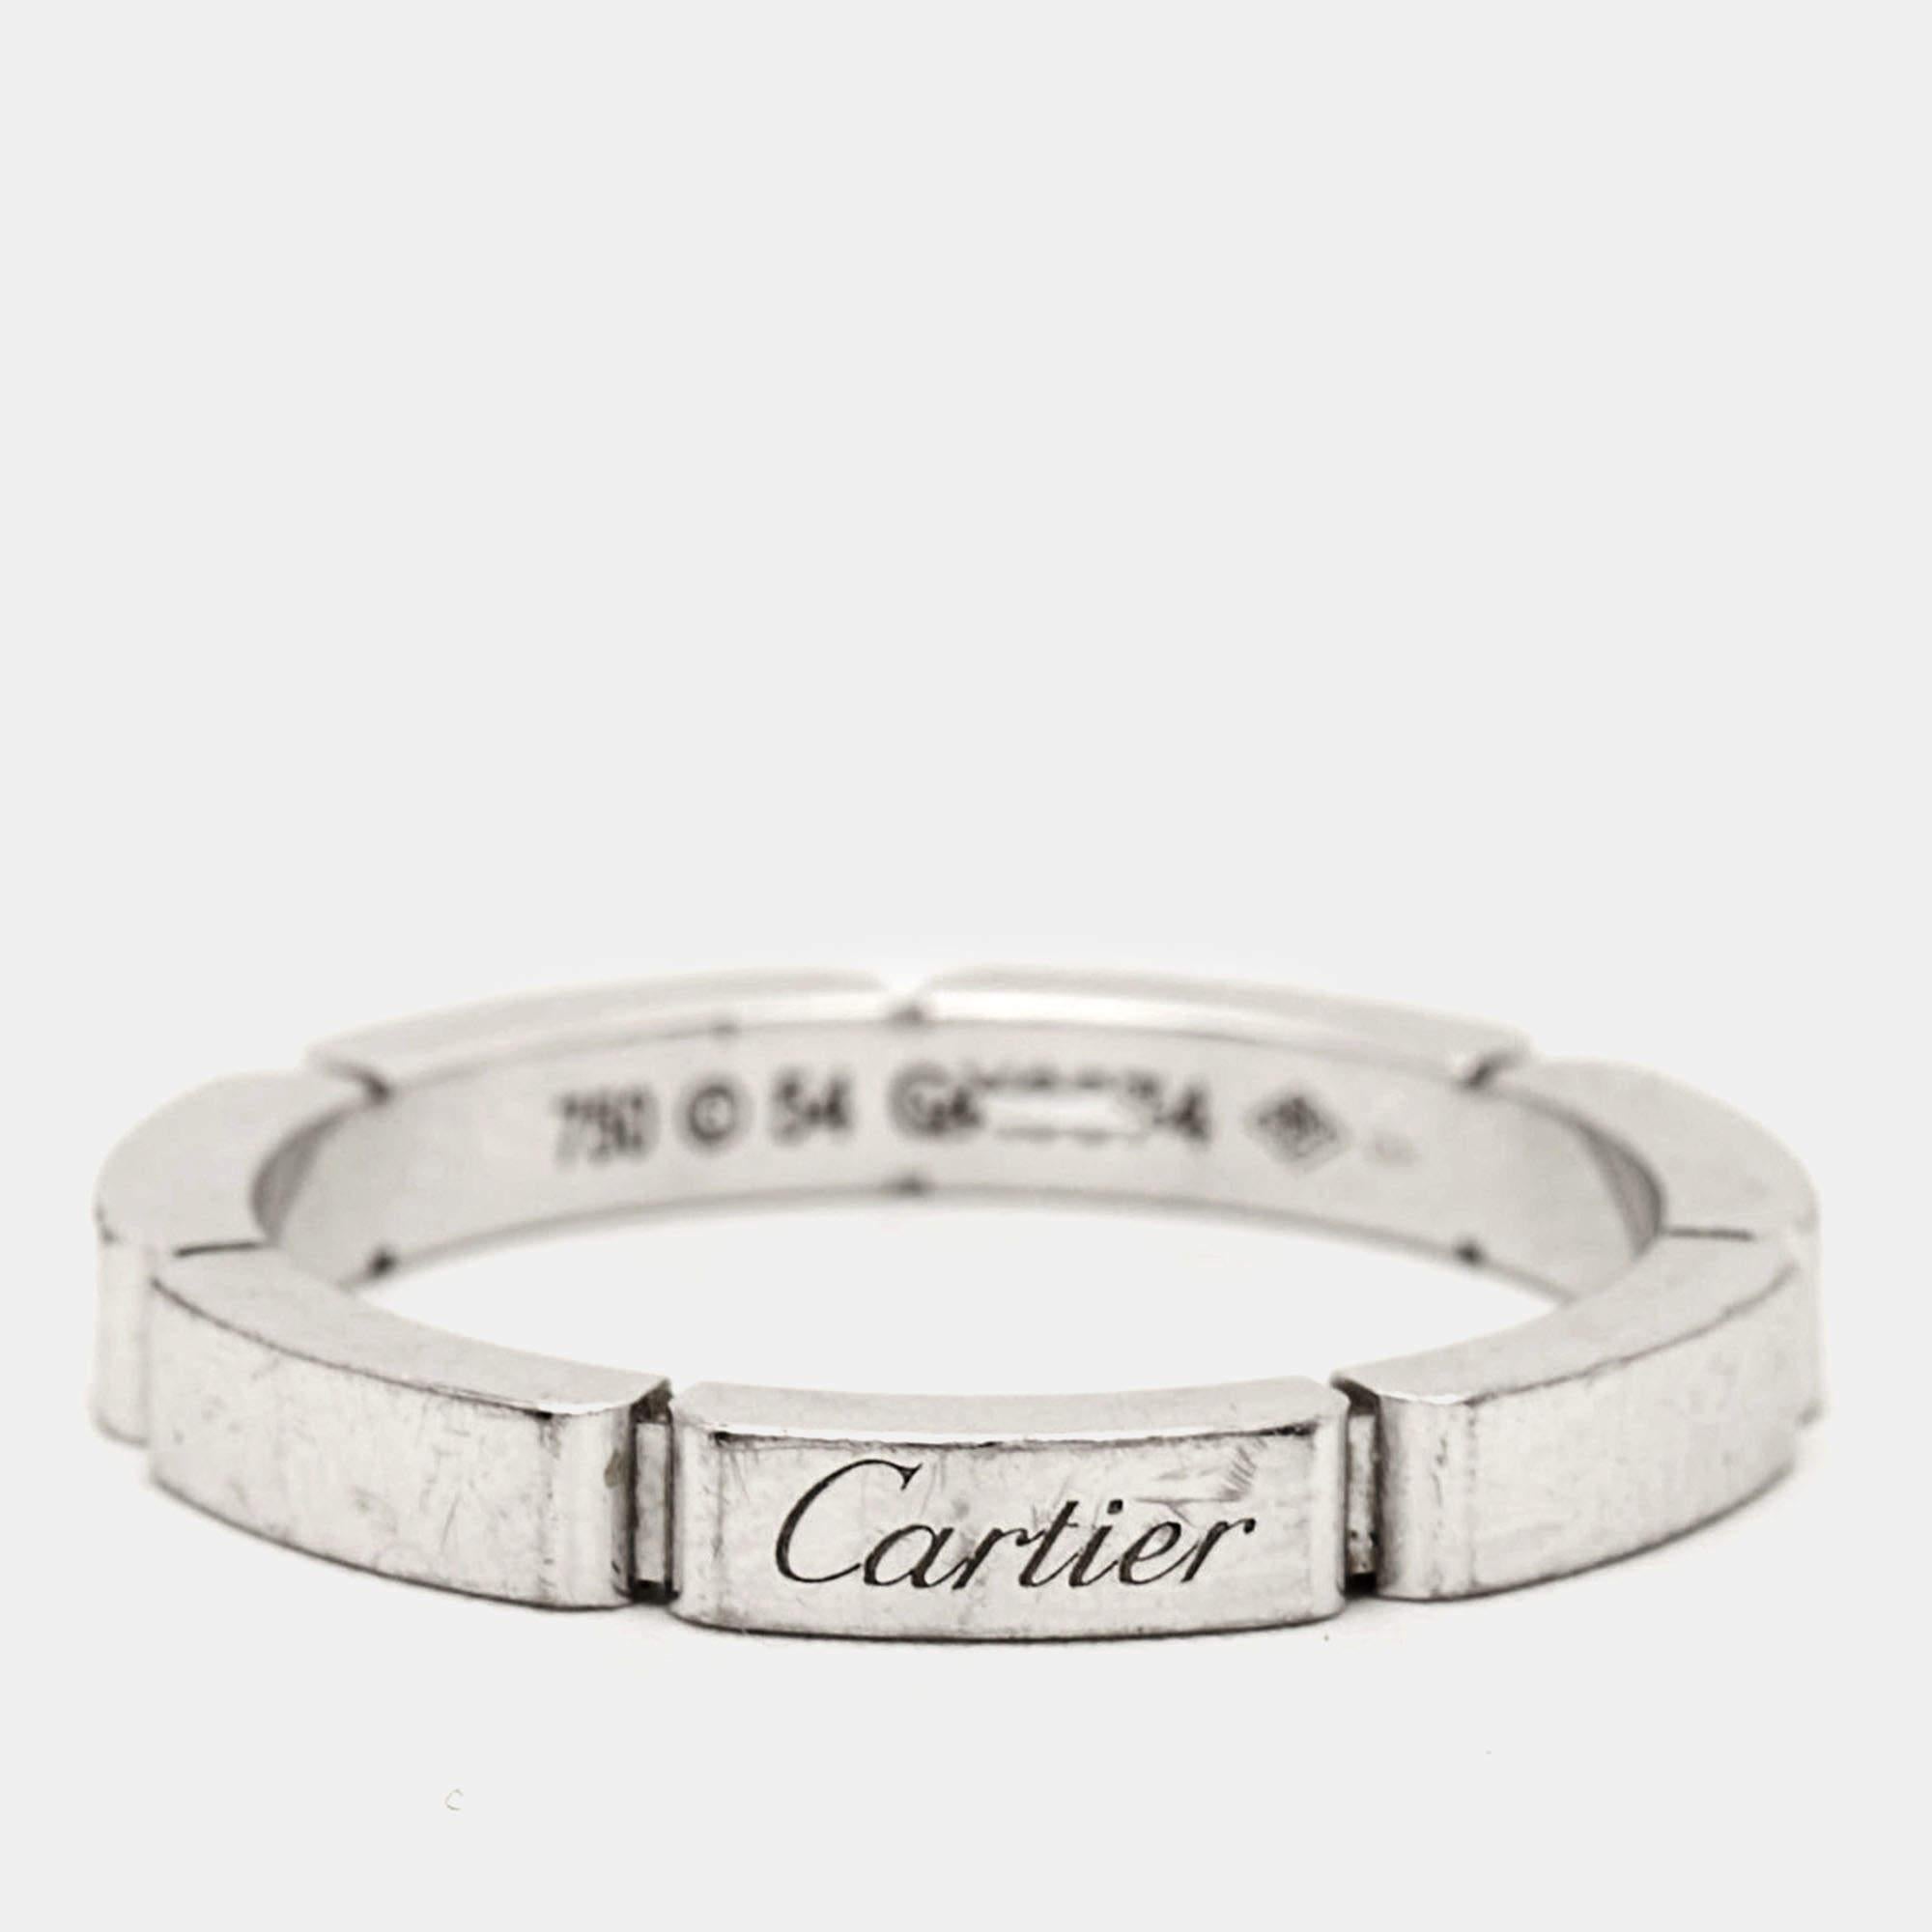 Experience the epitome of luxury and craftsmanship with this Cartier Mallion Panthere ring. Its timeless elegance and exceptional detailing make it a statement piece for any occasion.

